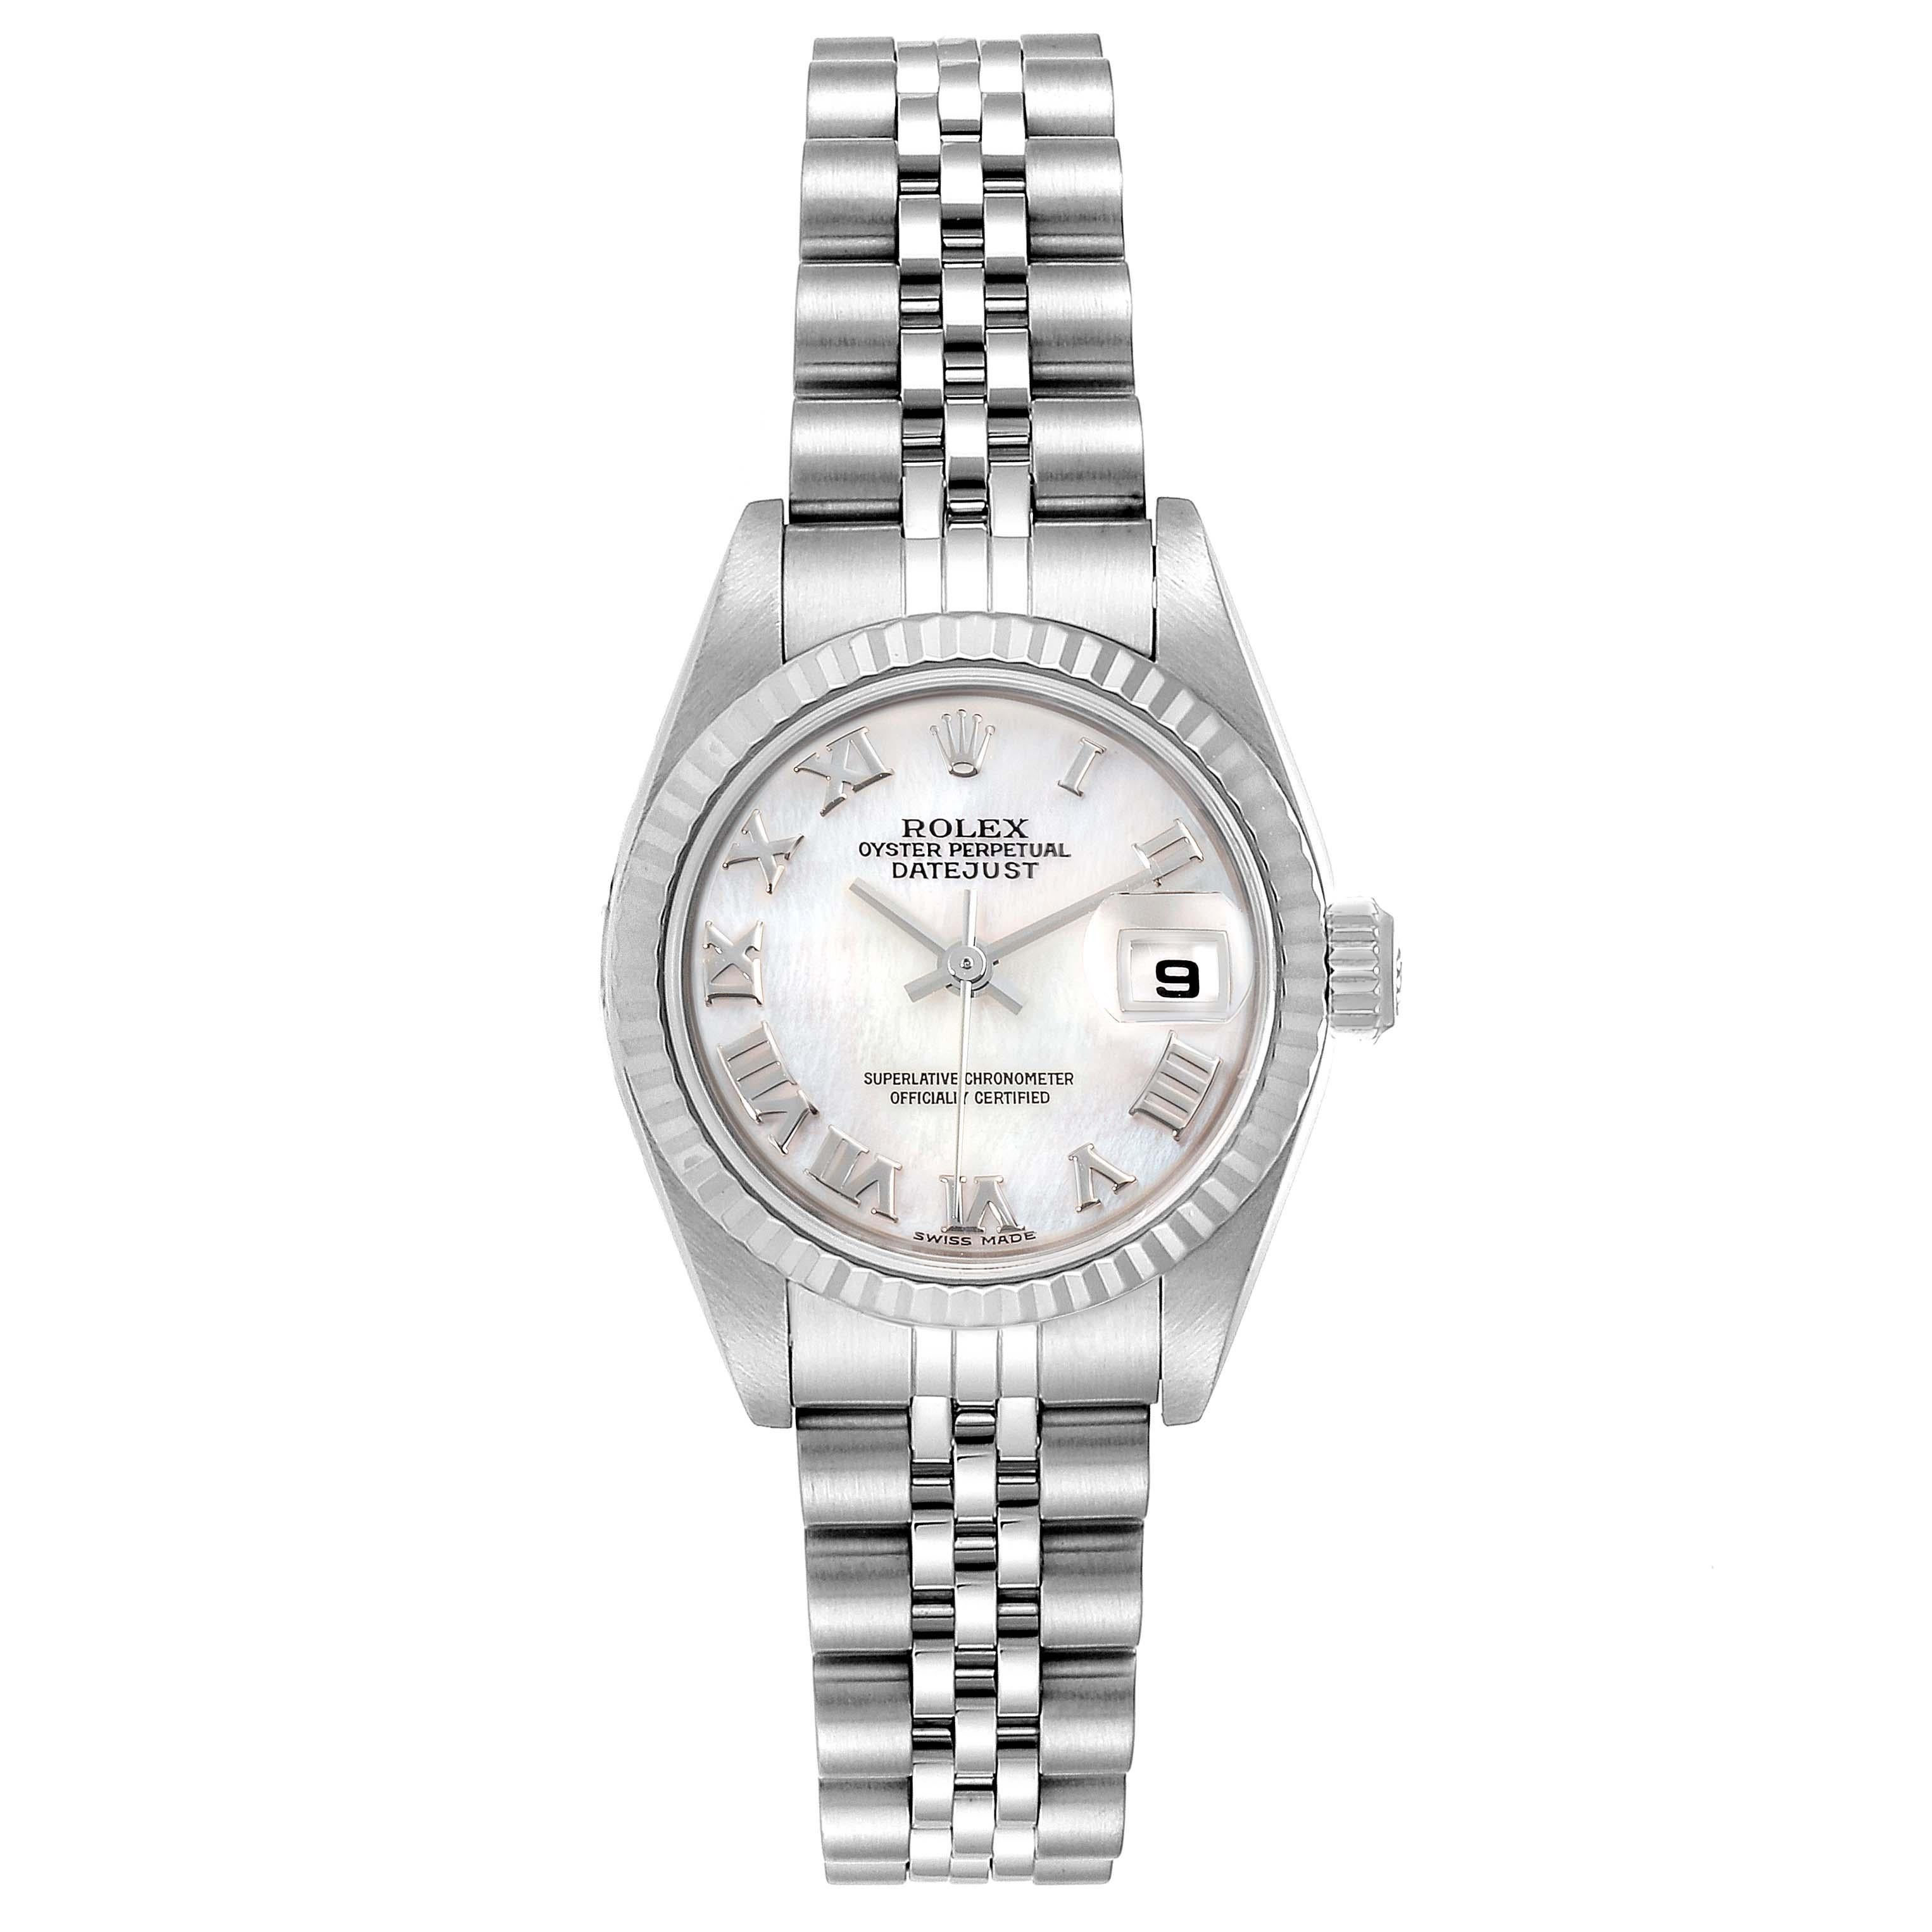 Rolex Datejust Mother of Pearl Dial Steel White Gold Ladies Watch 79174. Officially certified chronometer self-winding movement. Stainless steel oyster case 26.0 mm in diameter. Rolex logo on a crown. 18k white gold fluted bezel. Scratch resistant